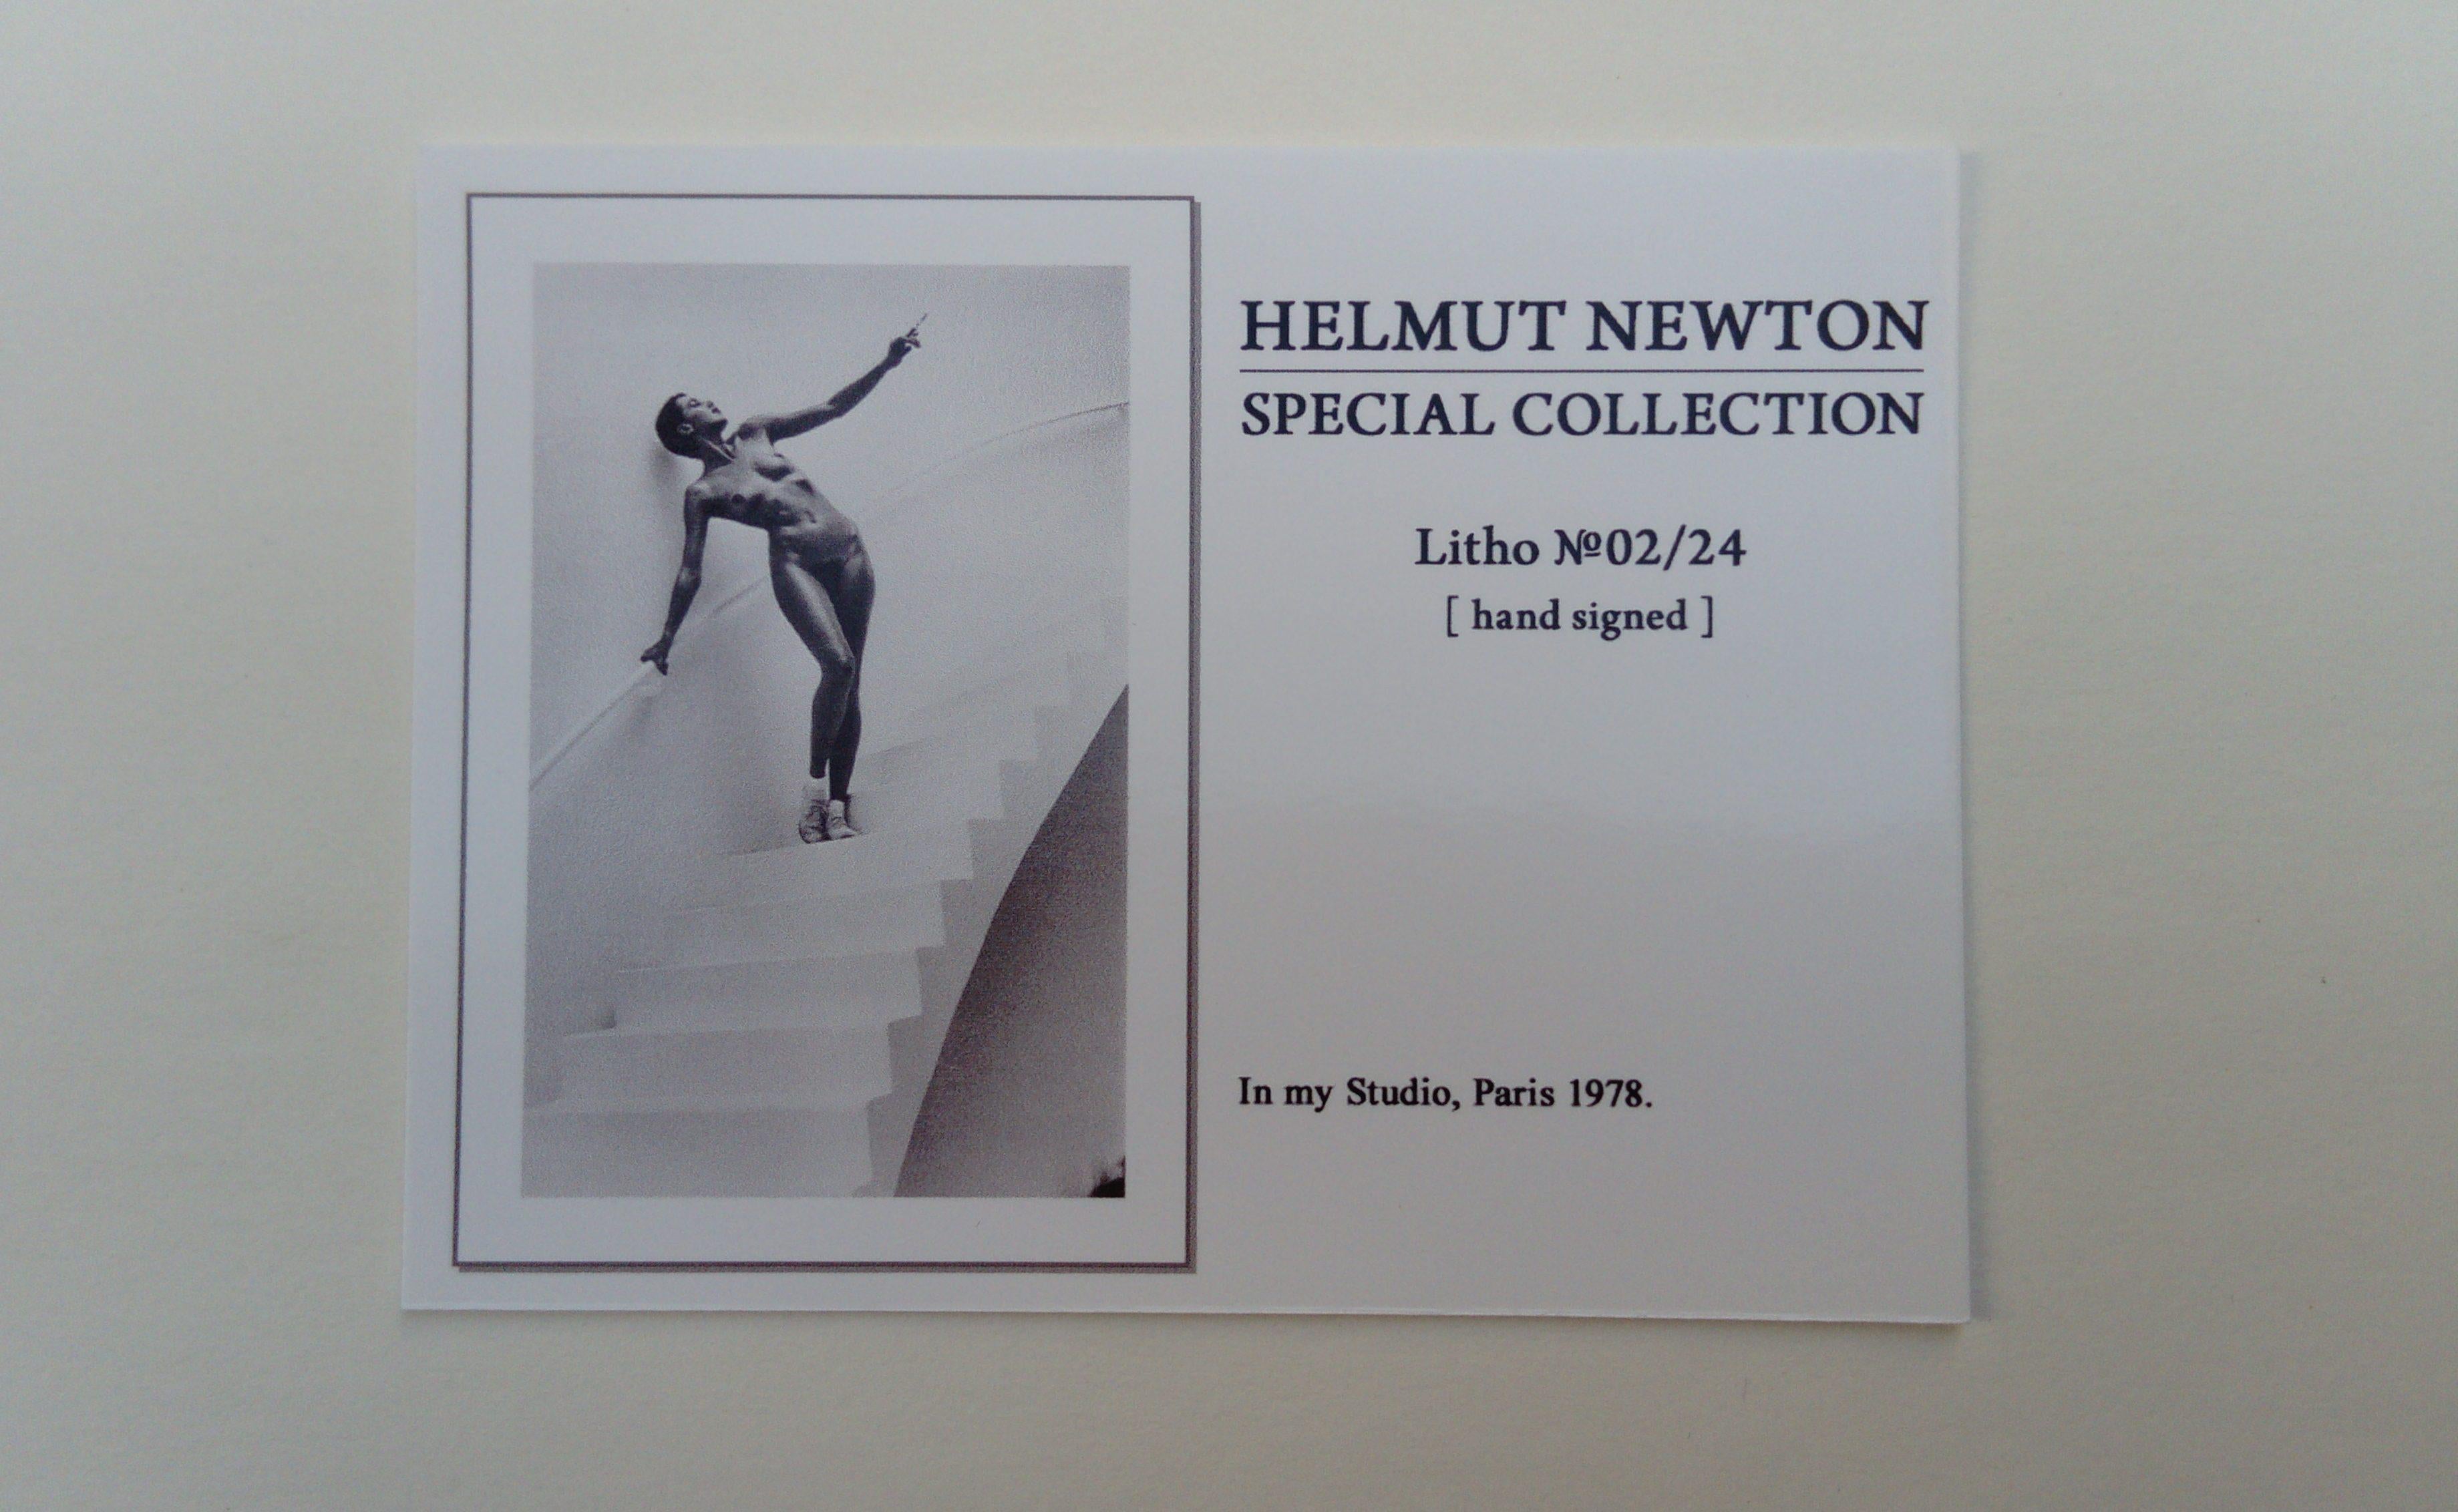 Very nice photo-lithography of Helmut Newton
Annotations on the back
Dimensions: 41 x 28 cm
Signed by the artist in pencil
Perfect condition - neat shipment